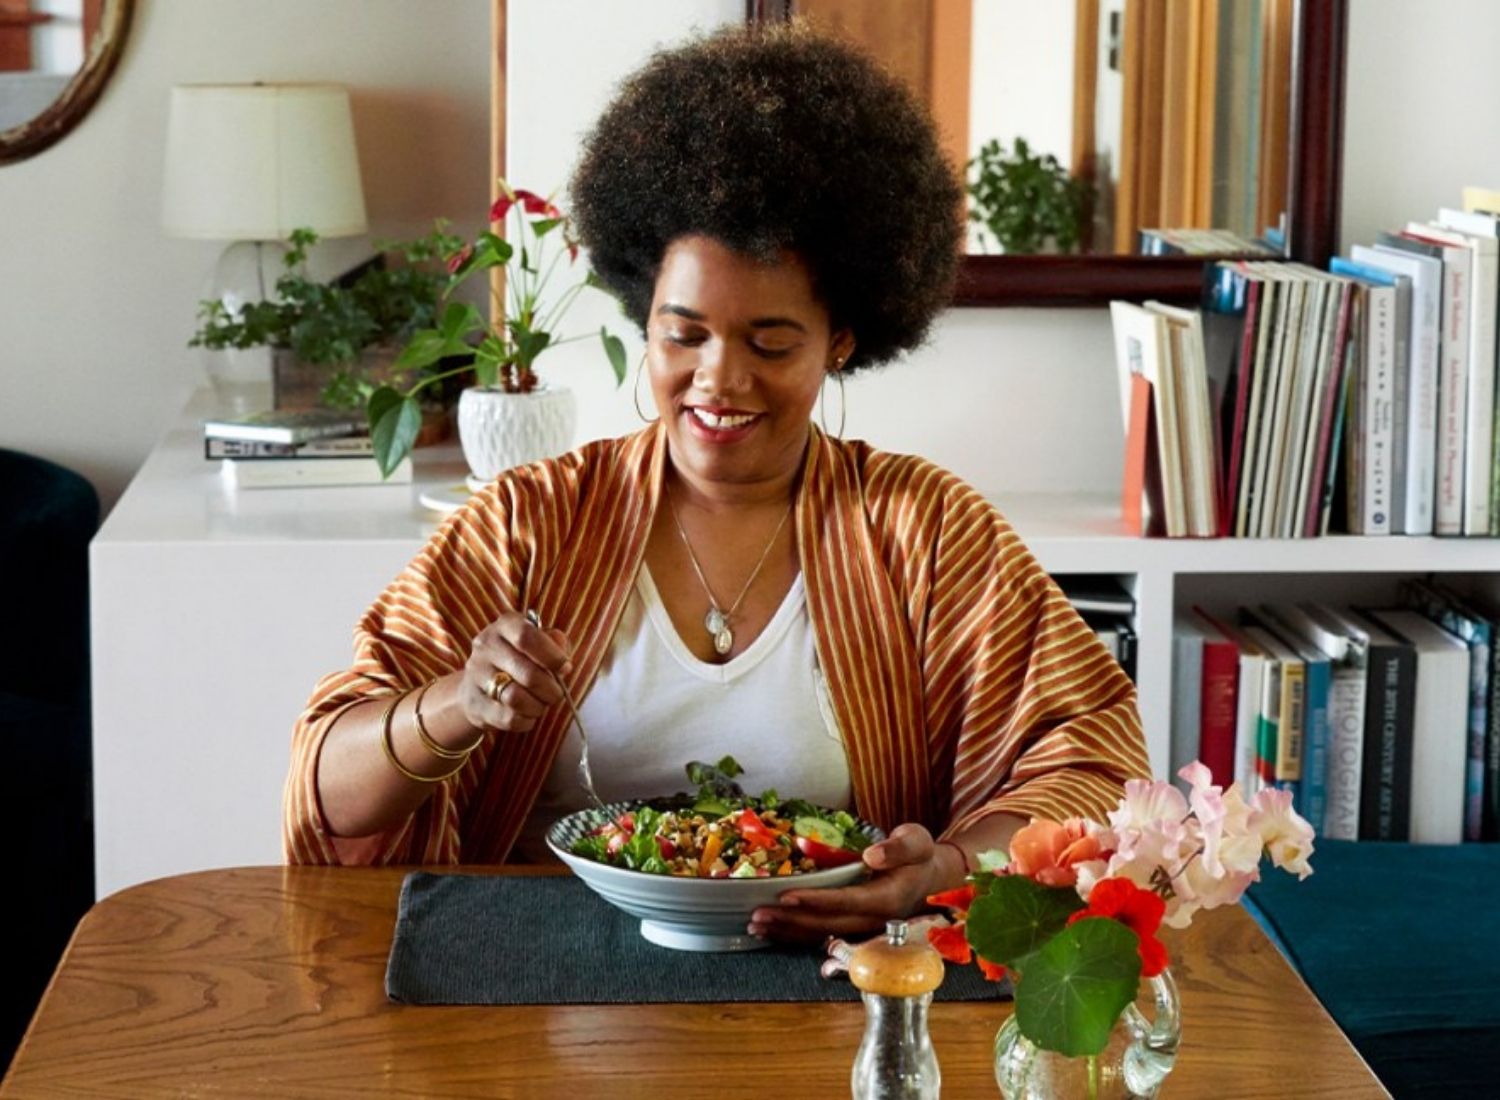 9 Effective Tips For Mindful Eating During COVID-19